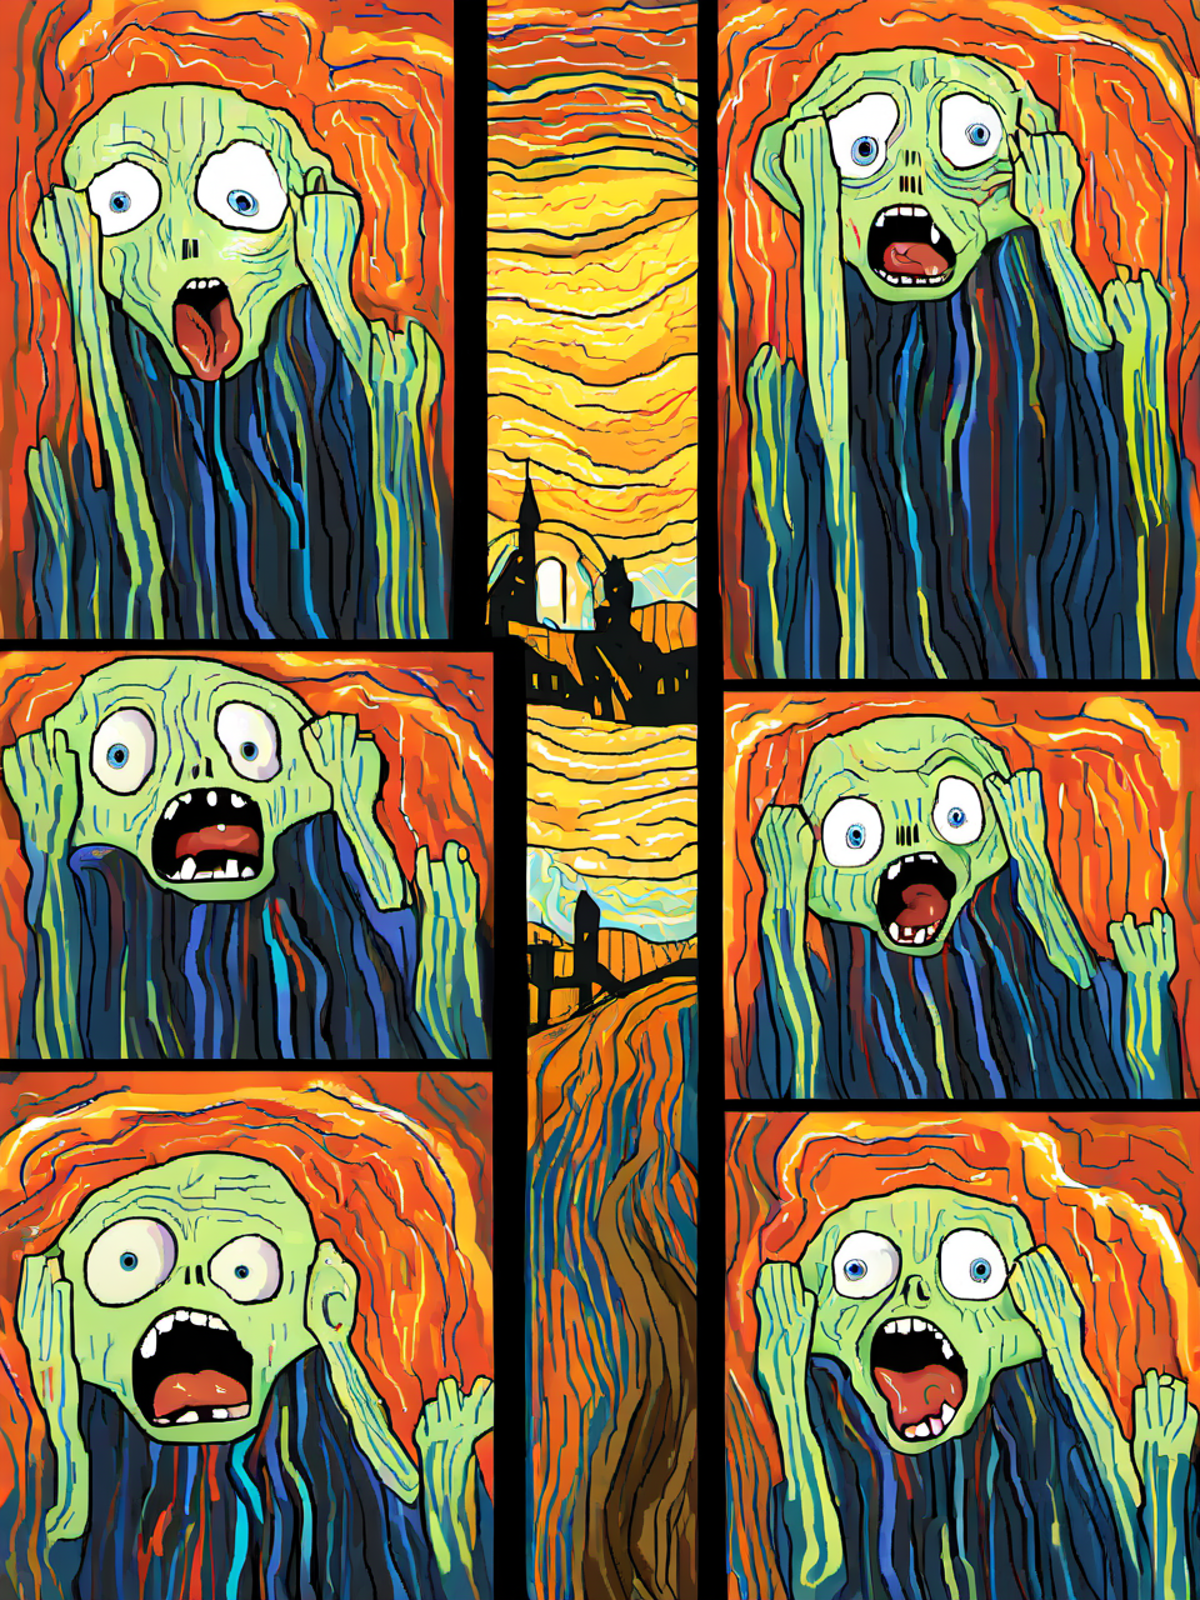 A series of images showing a screaming zombie with different expressions.